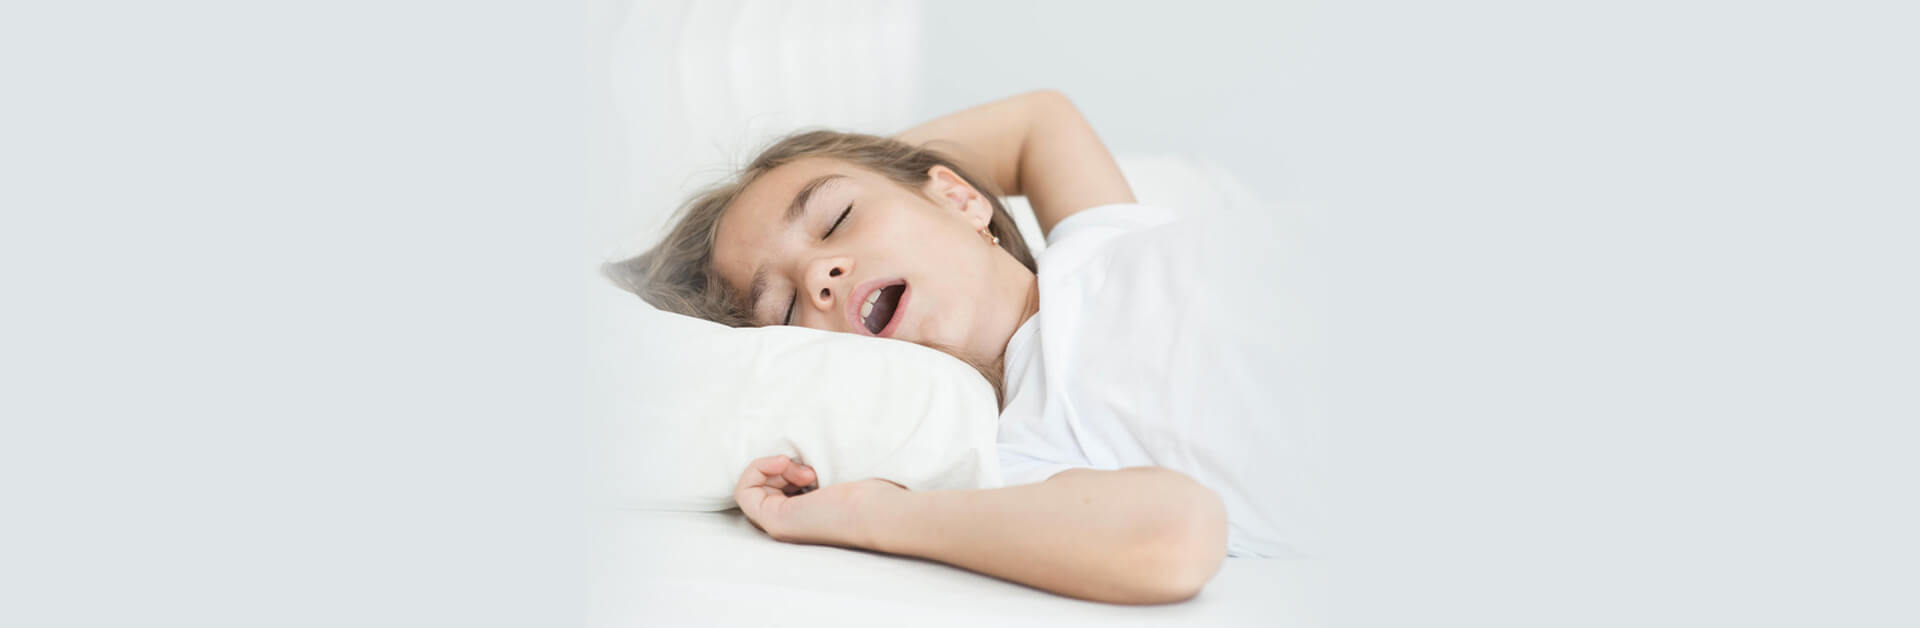 9 SIGNS THAT YOUR CHILD IS SLEEPING OR BREATHING WITH AN OPEN MOUTH